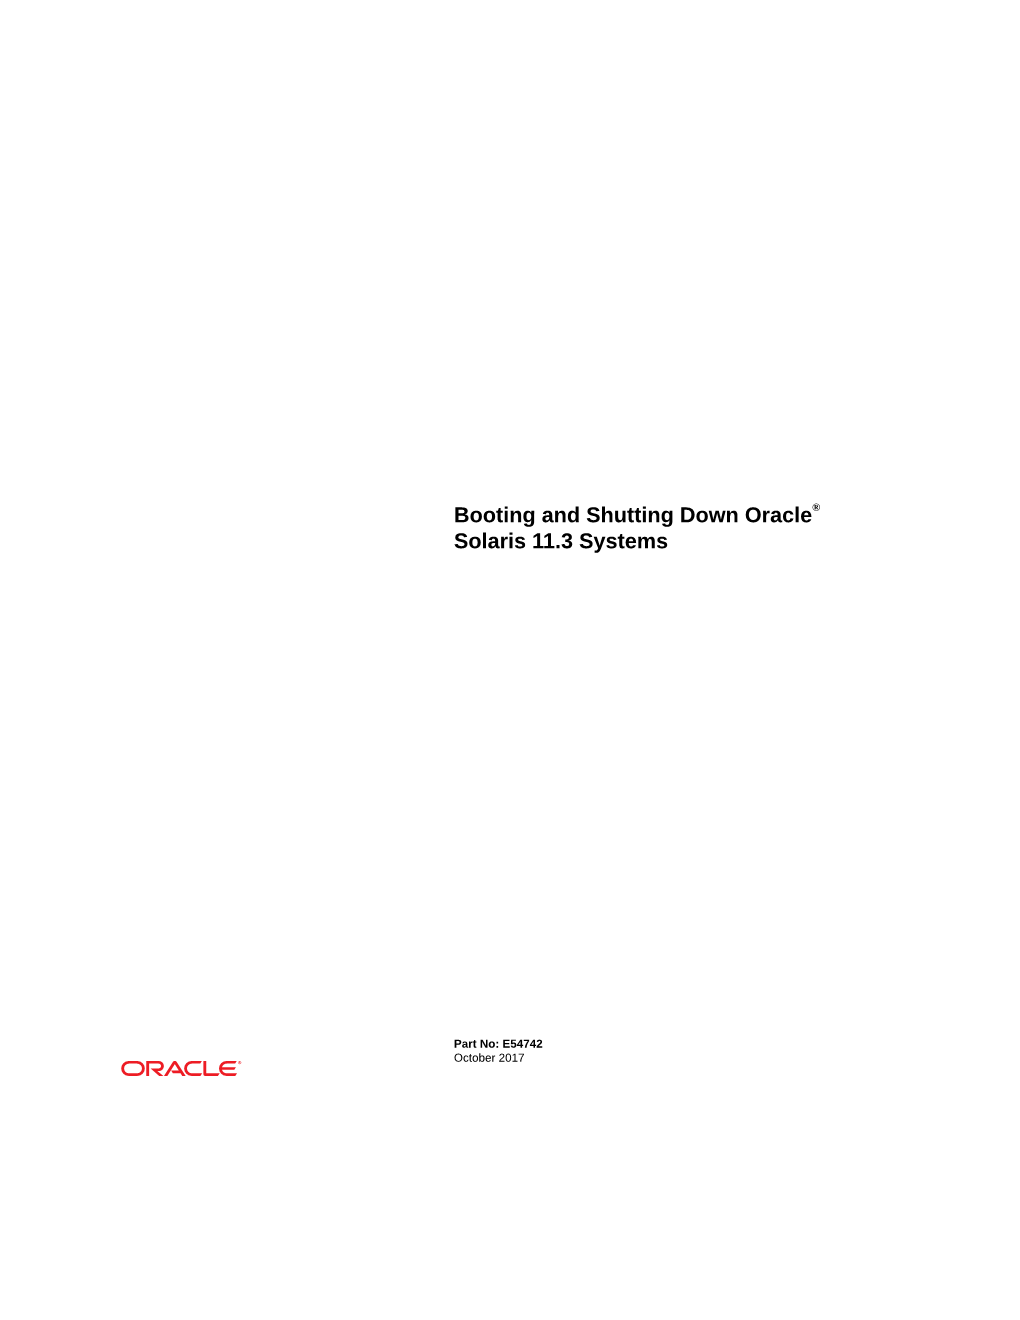 Booting and Shutting Down Oracle® Solaris 11.3 Systems